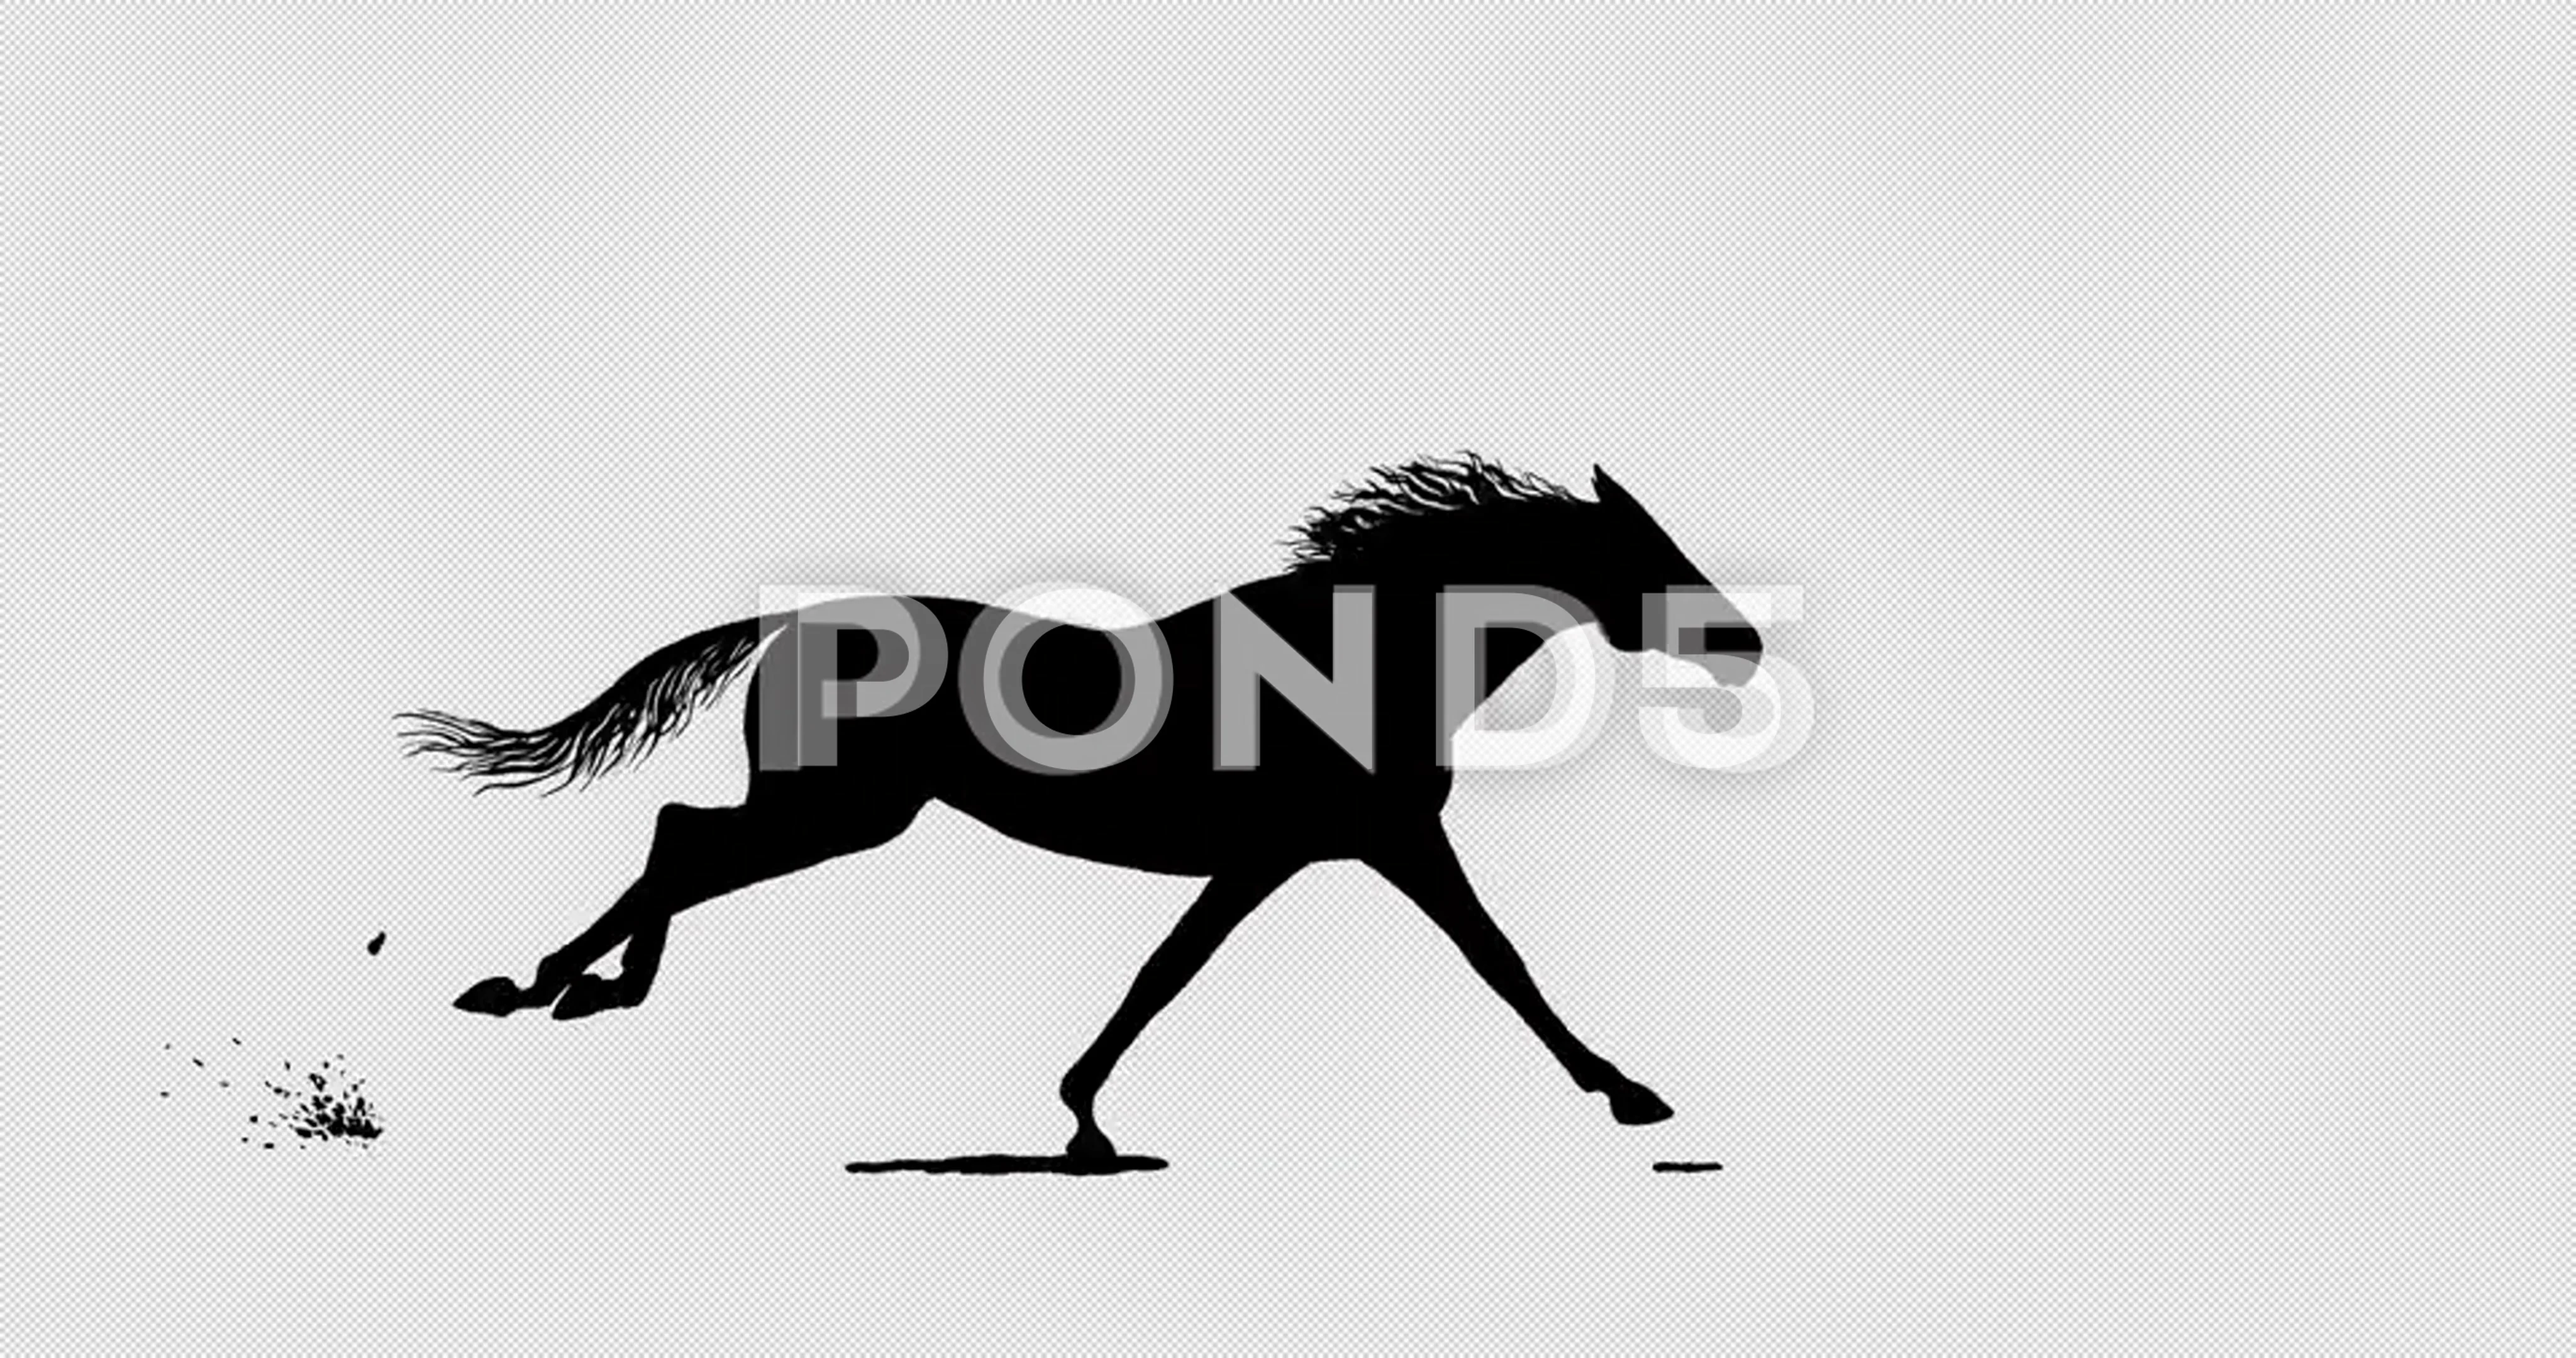 Galloping horse. Animated hand drawn bla... | Stock Video | Pond5